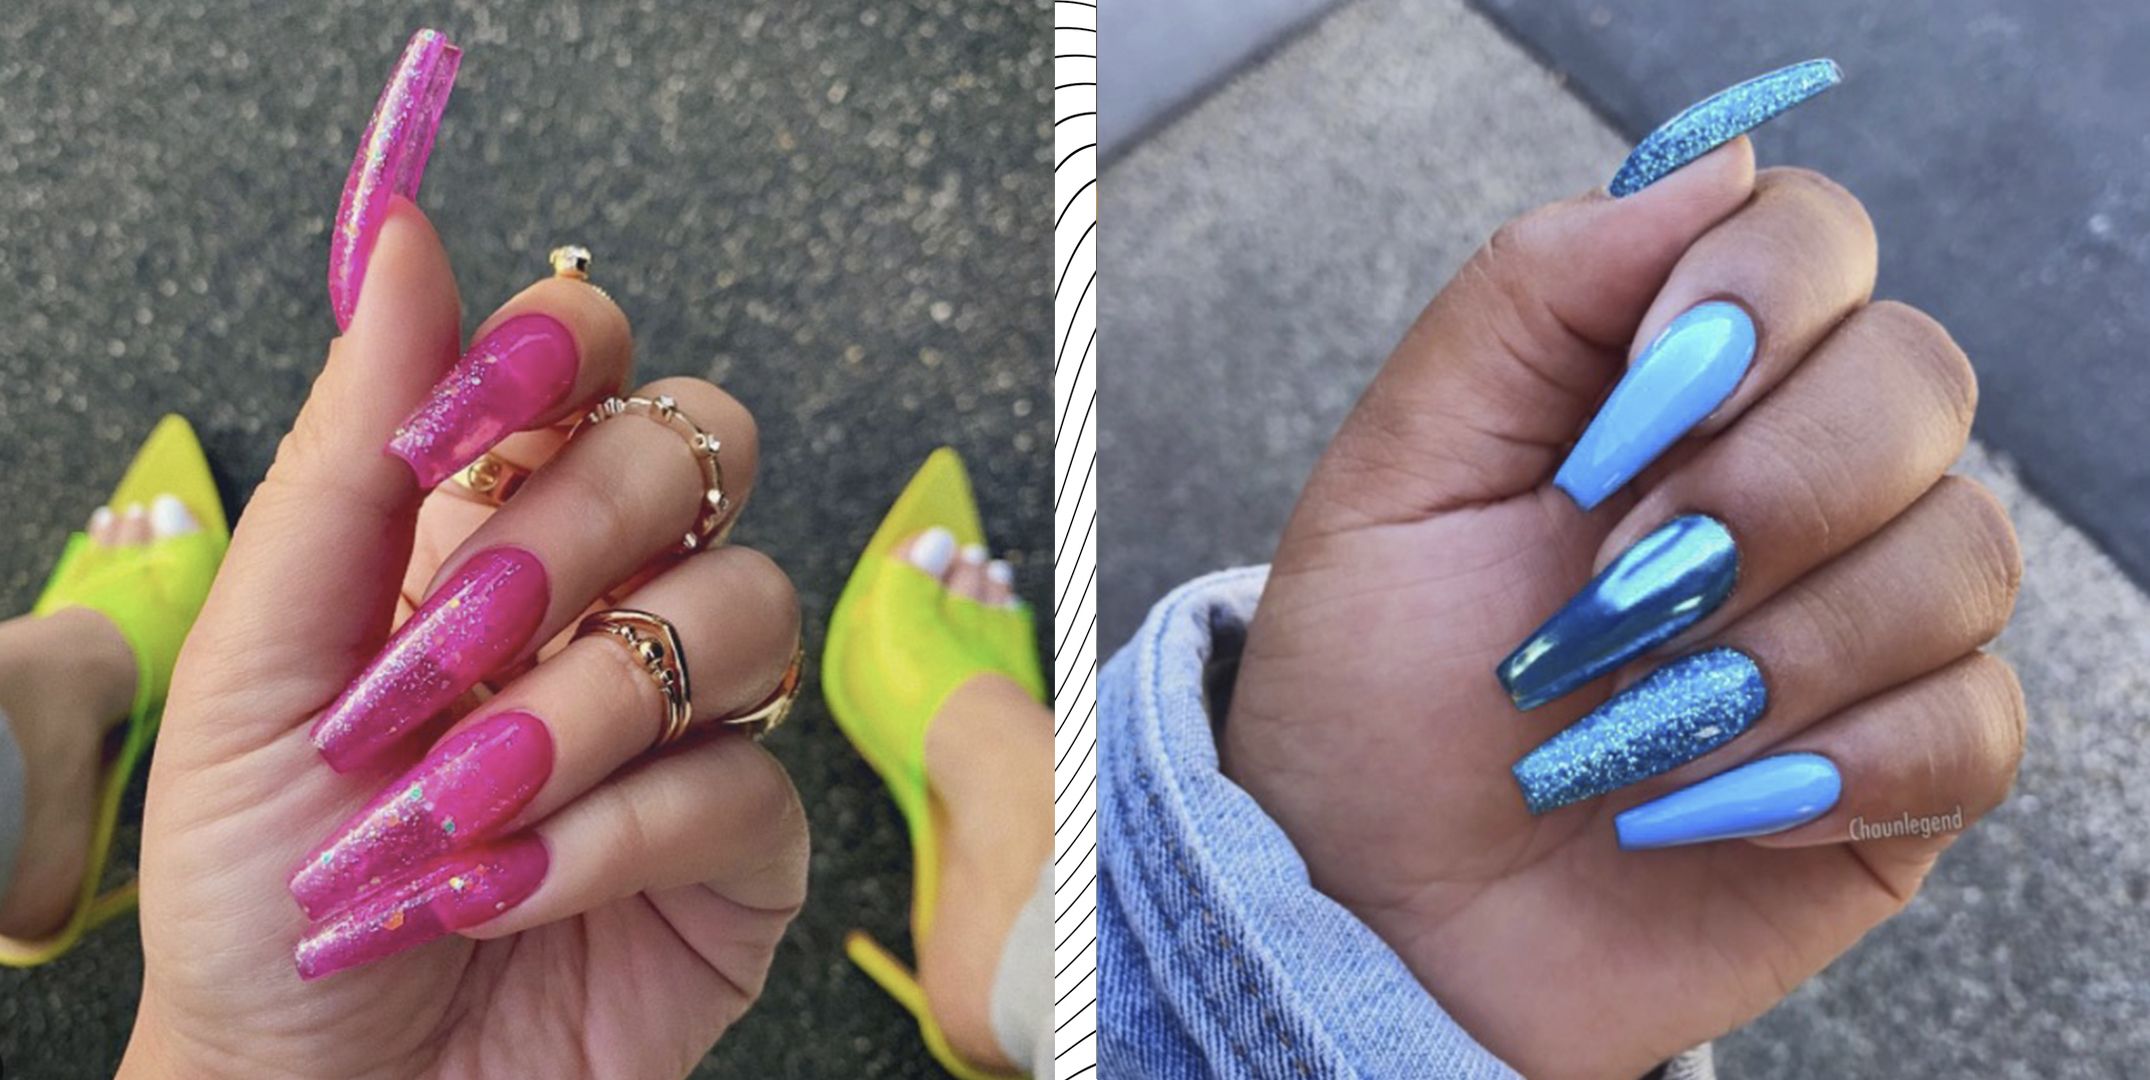 16 Summer 2023 Nail Art Trends That'll Make Your Manis Pop